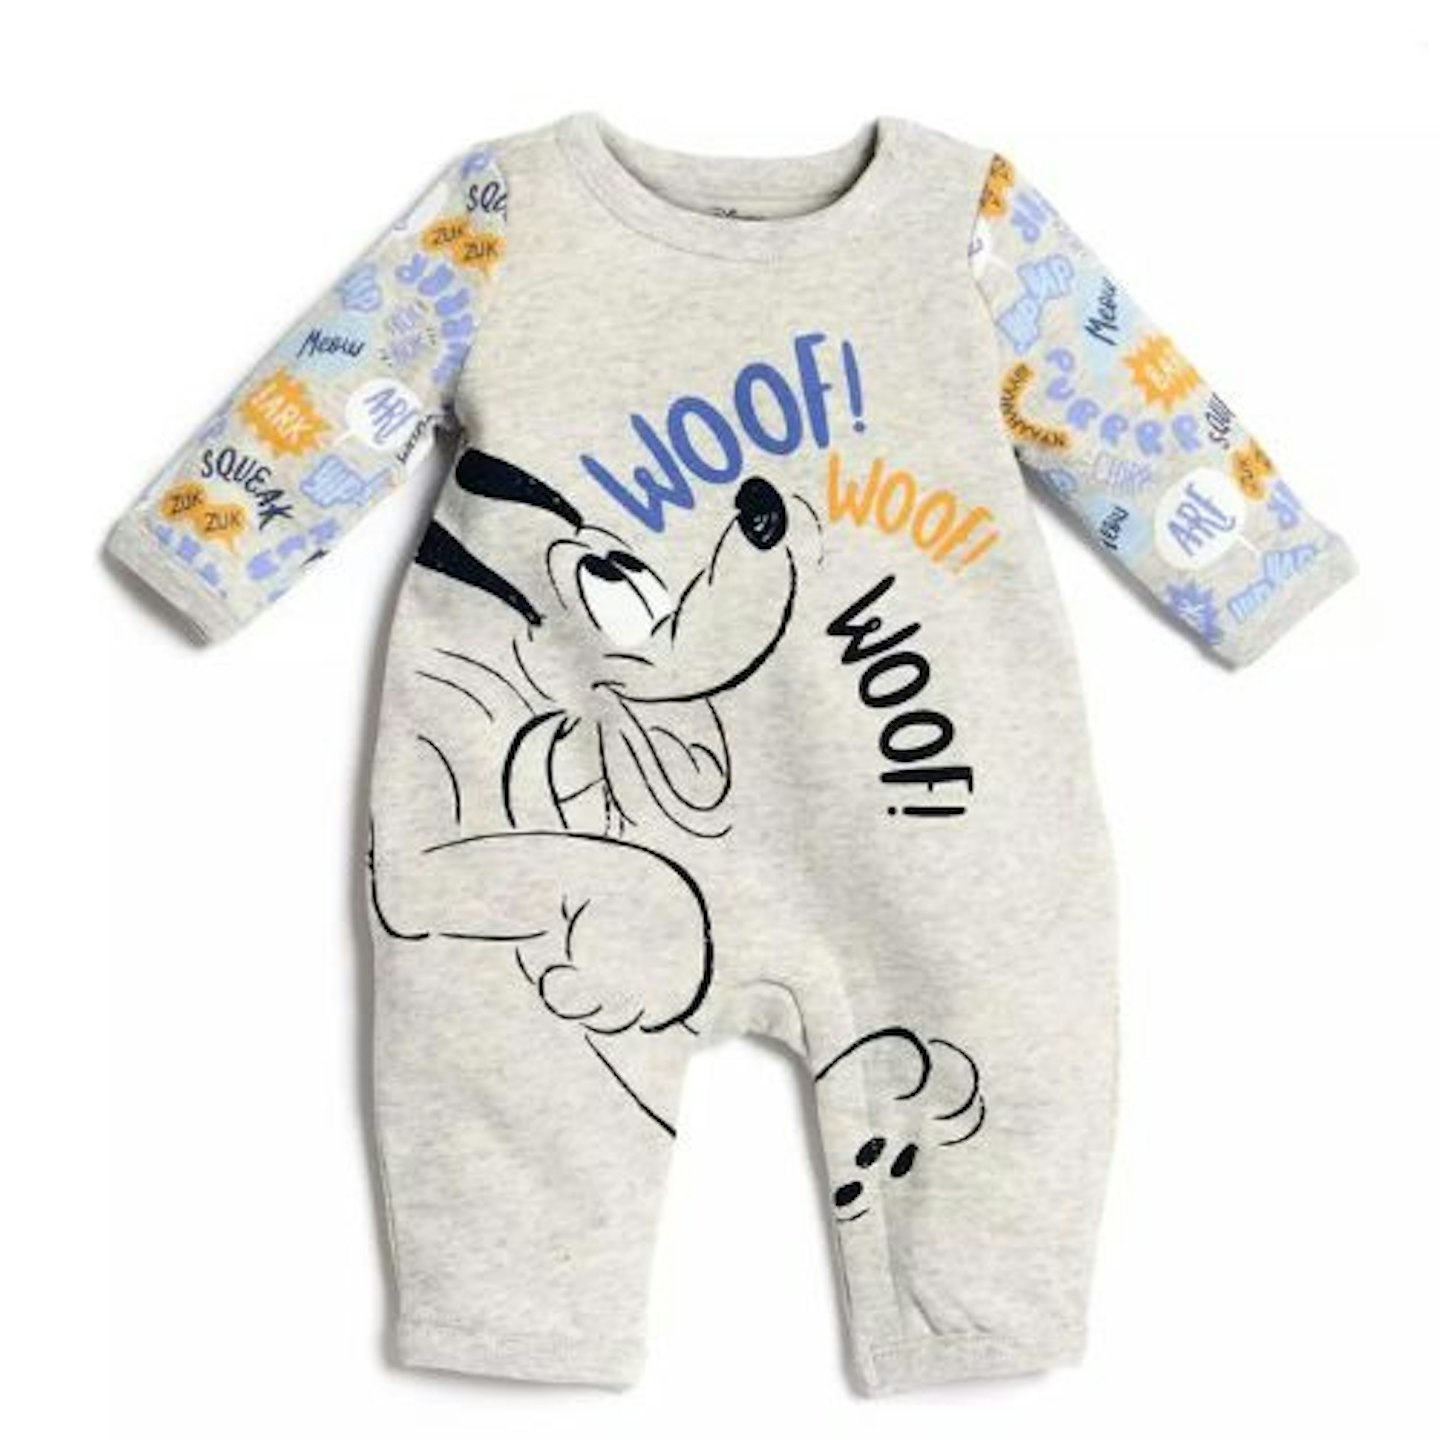 Best Disney clothes for baby Disney Store Pluto Baby Romper